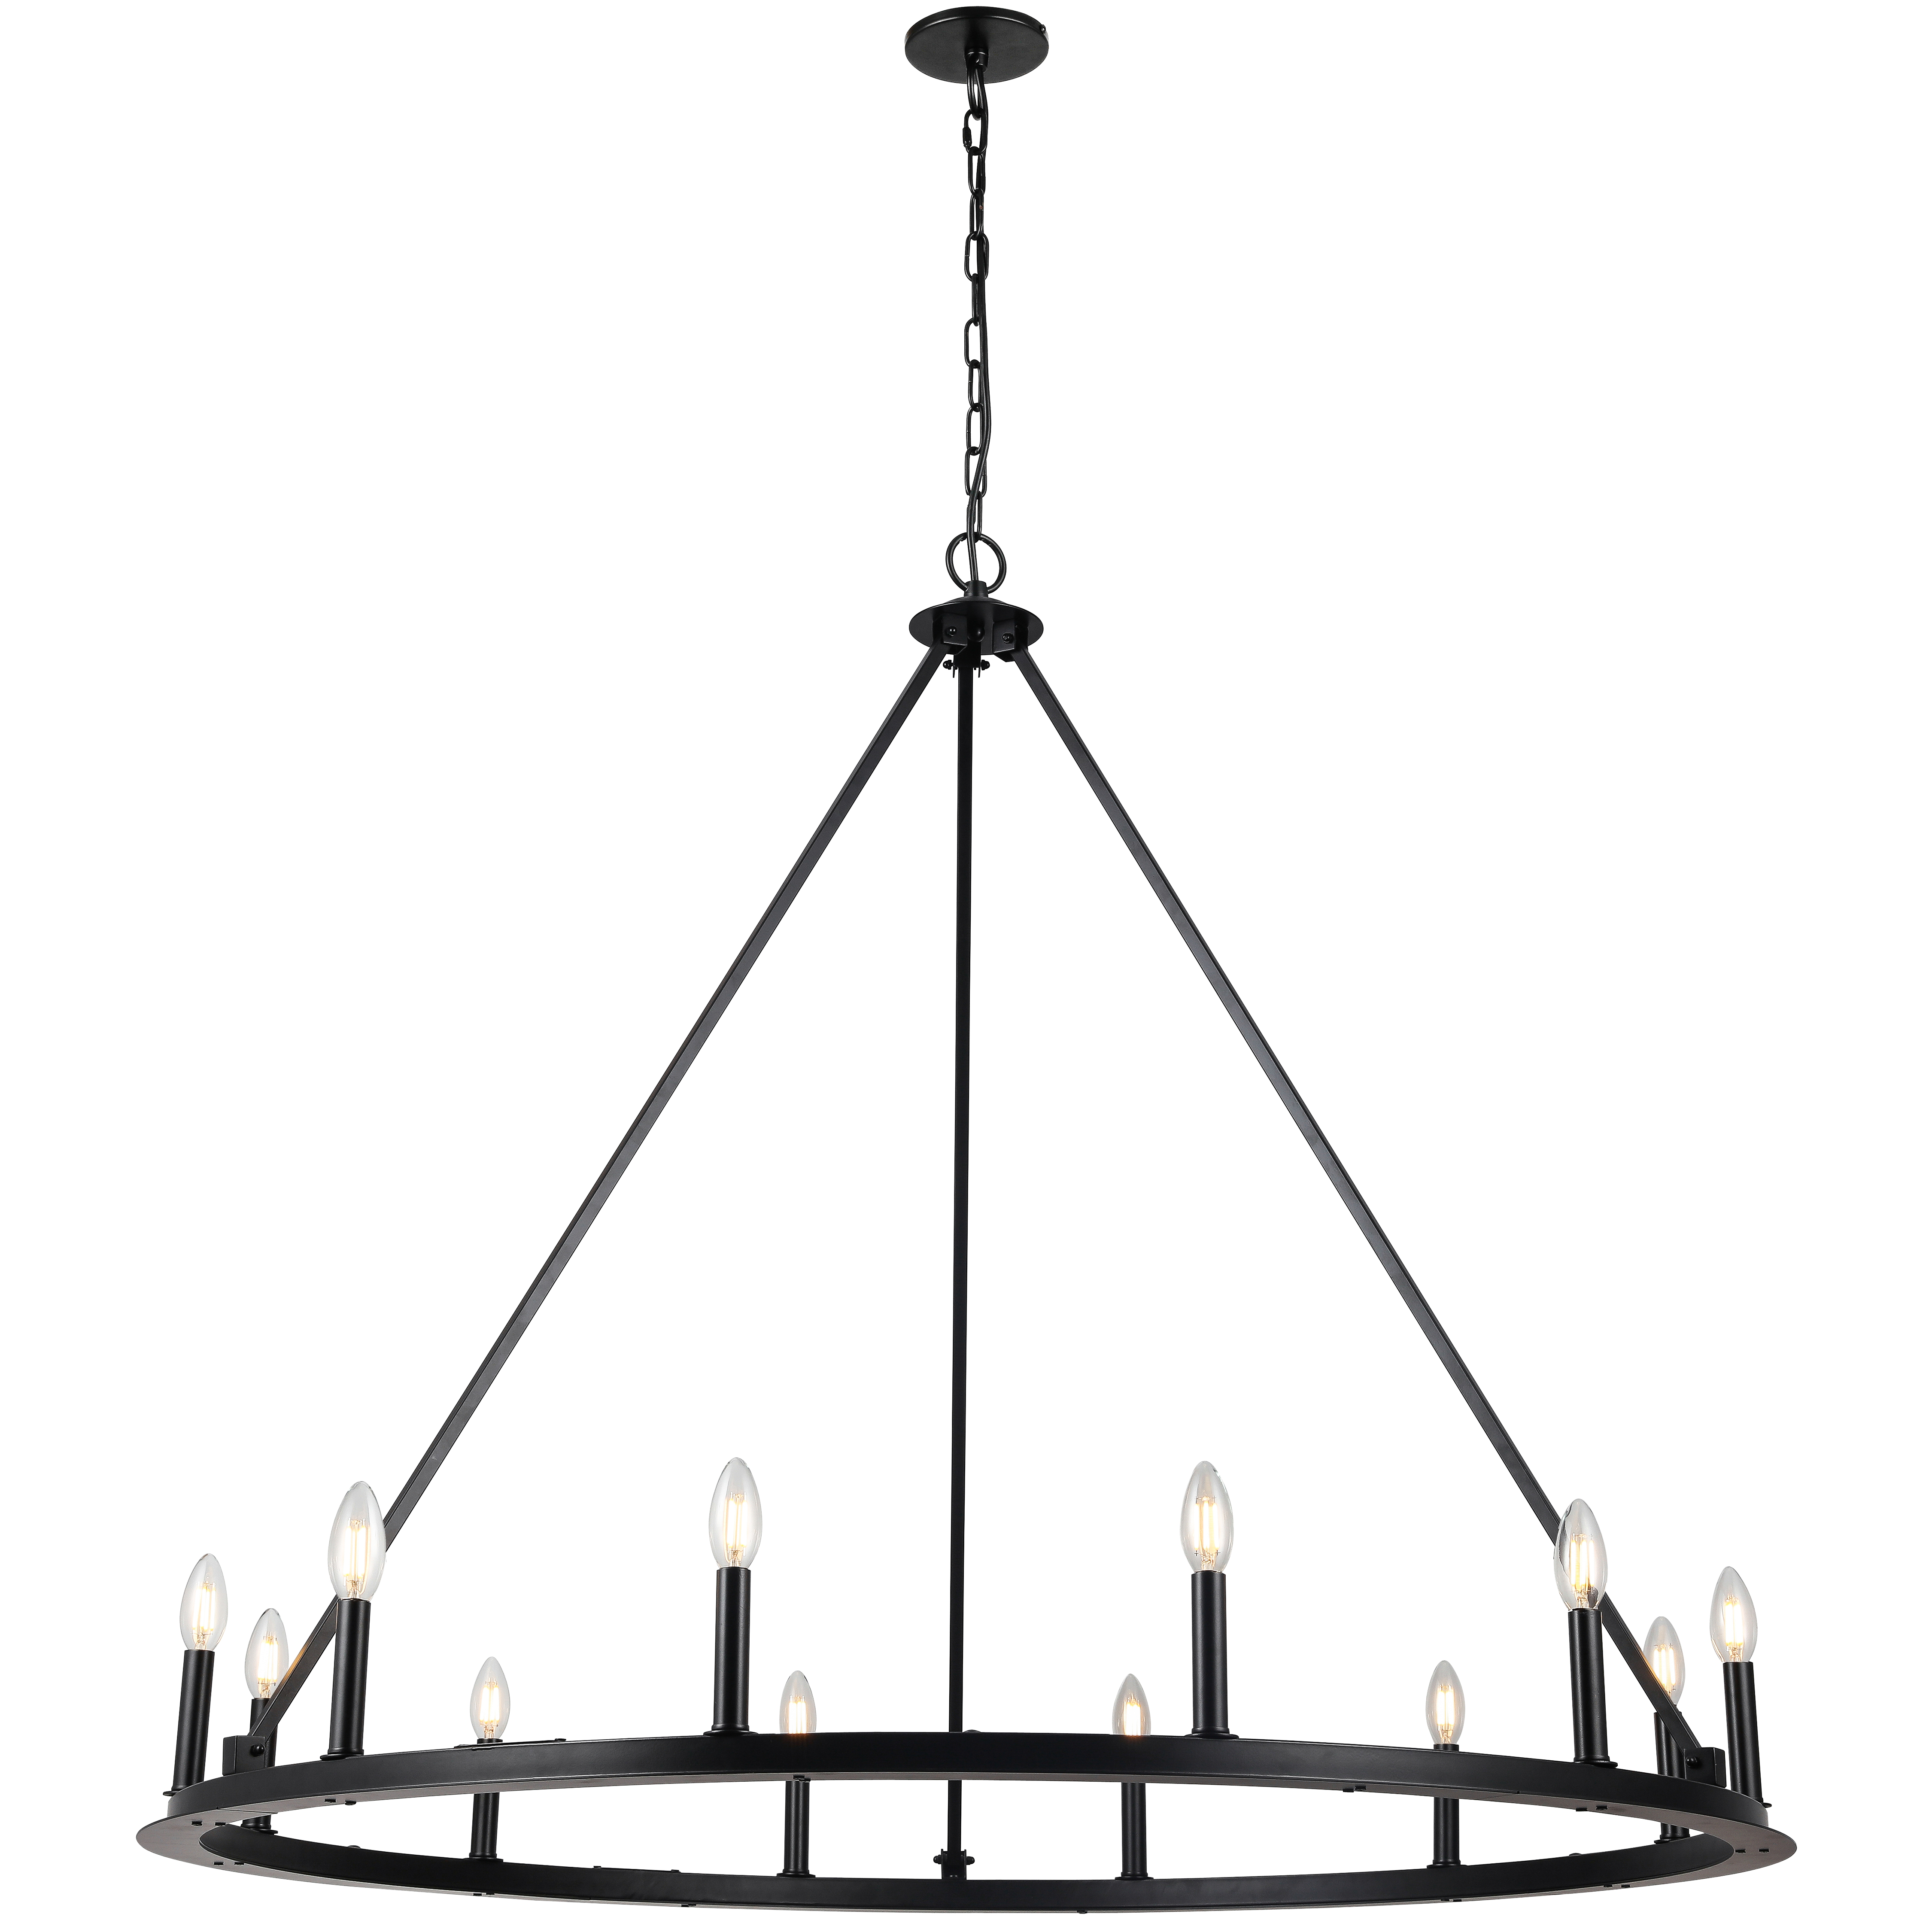 With an allure that takes its inspiration from period banquet halls, the Colby line of chandeliers adds a sleek modern finish. The effect is transitional  one that can blend with virtually any type of décor.  A chain drop and metal frame in elegant matte black contrast white incandescent lights with a traditional design. Clean, precise lines add a modern statement to its traditional elements.  A Colby chandelier with make a focal point of your dining room table, or add a sophisticated touch of luxury to kitchens, hallways or foyers.